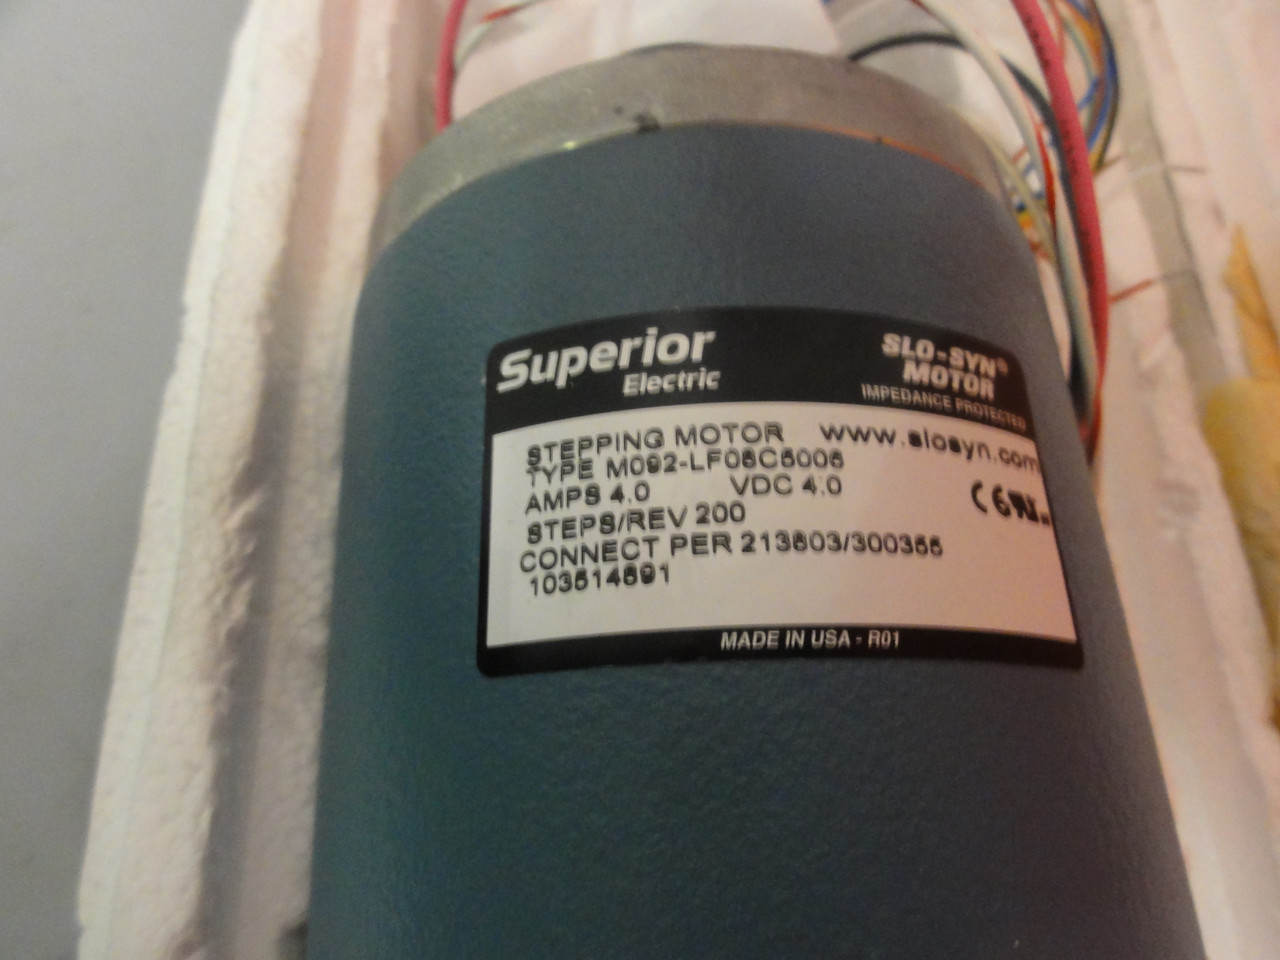 Superior Electric Slo-Syn Stepping Motor Type M0920LF08CS006